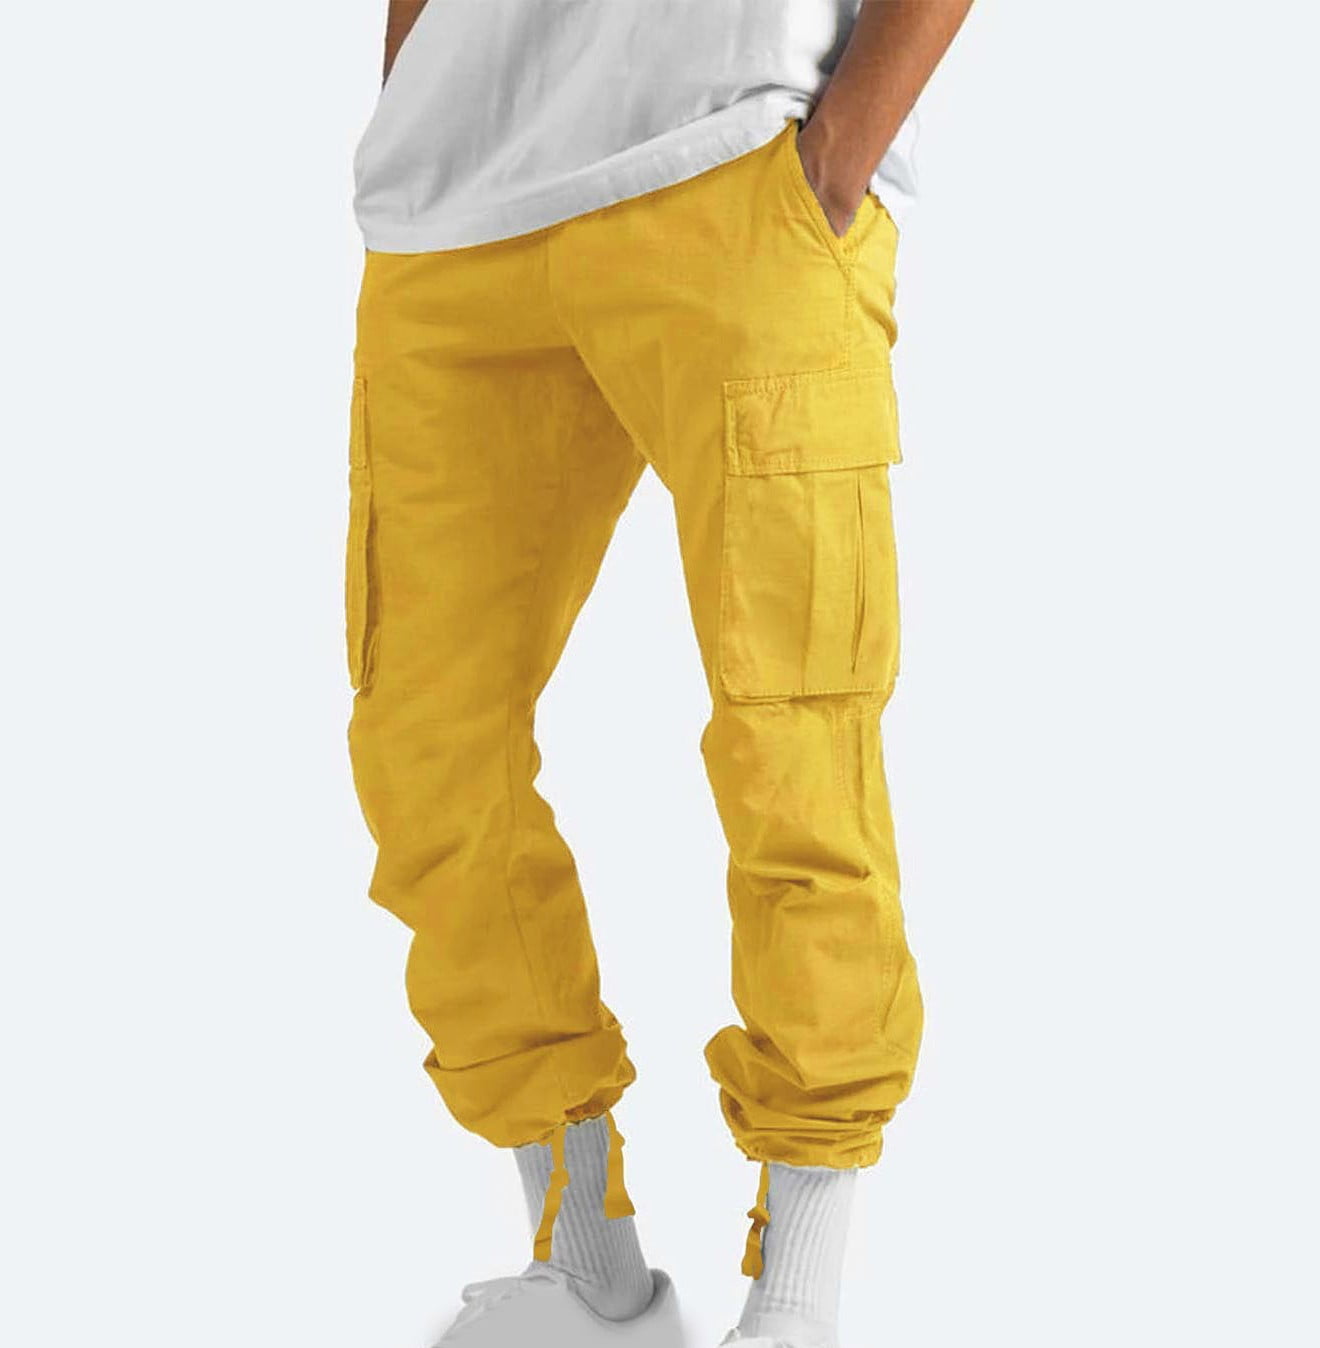 Up to 65% off Cargo Pants for Men's Cargo Trousers Work Wear Combat ...